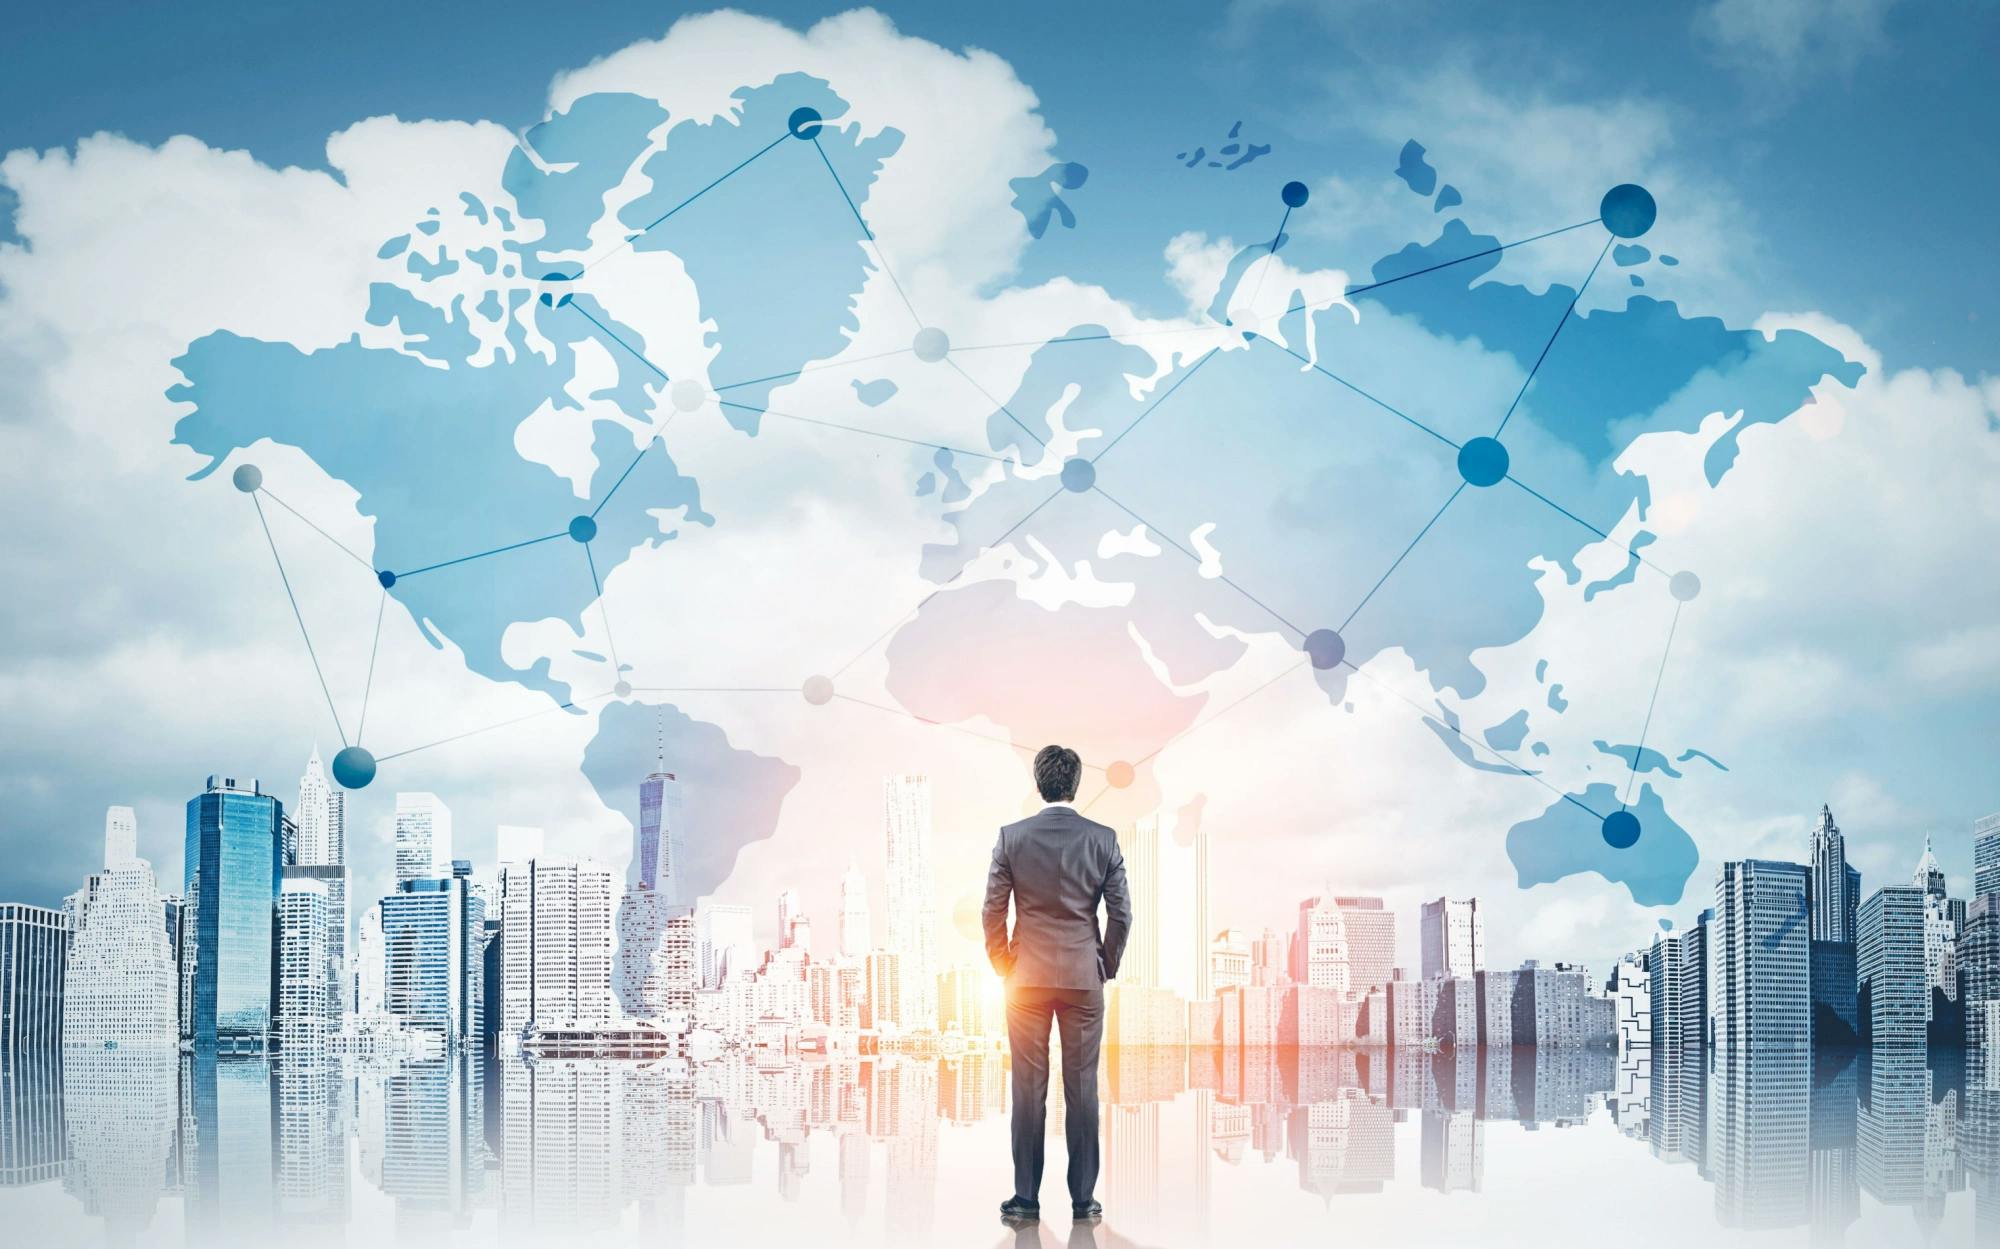 Business man standing in front of a cityscape with a world map laid on top of the image